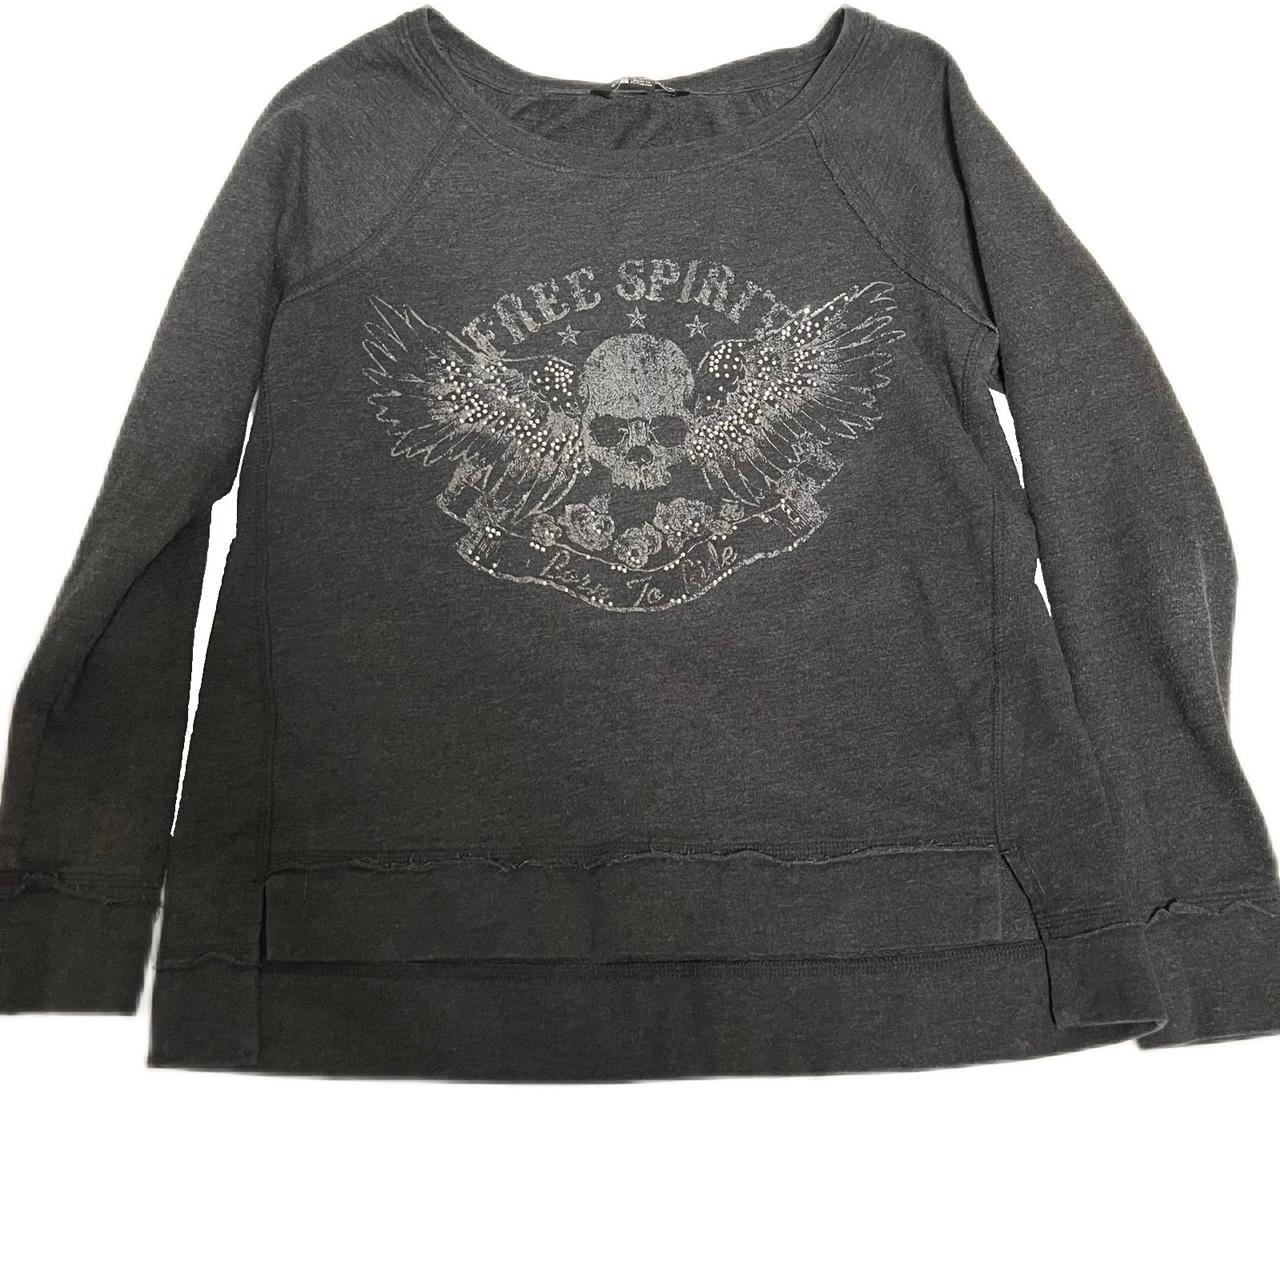 Rock and Republic Women's Grey and White Shirt